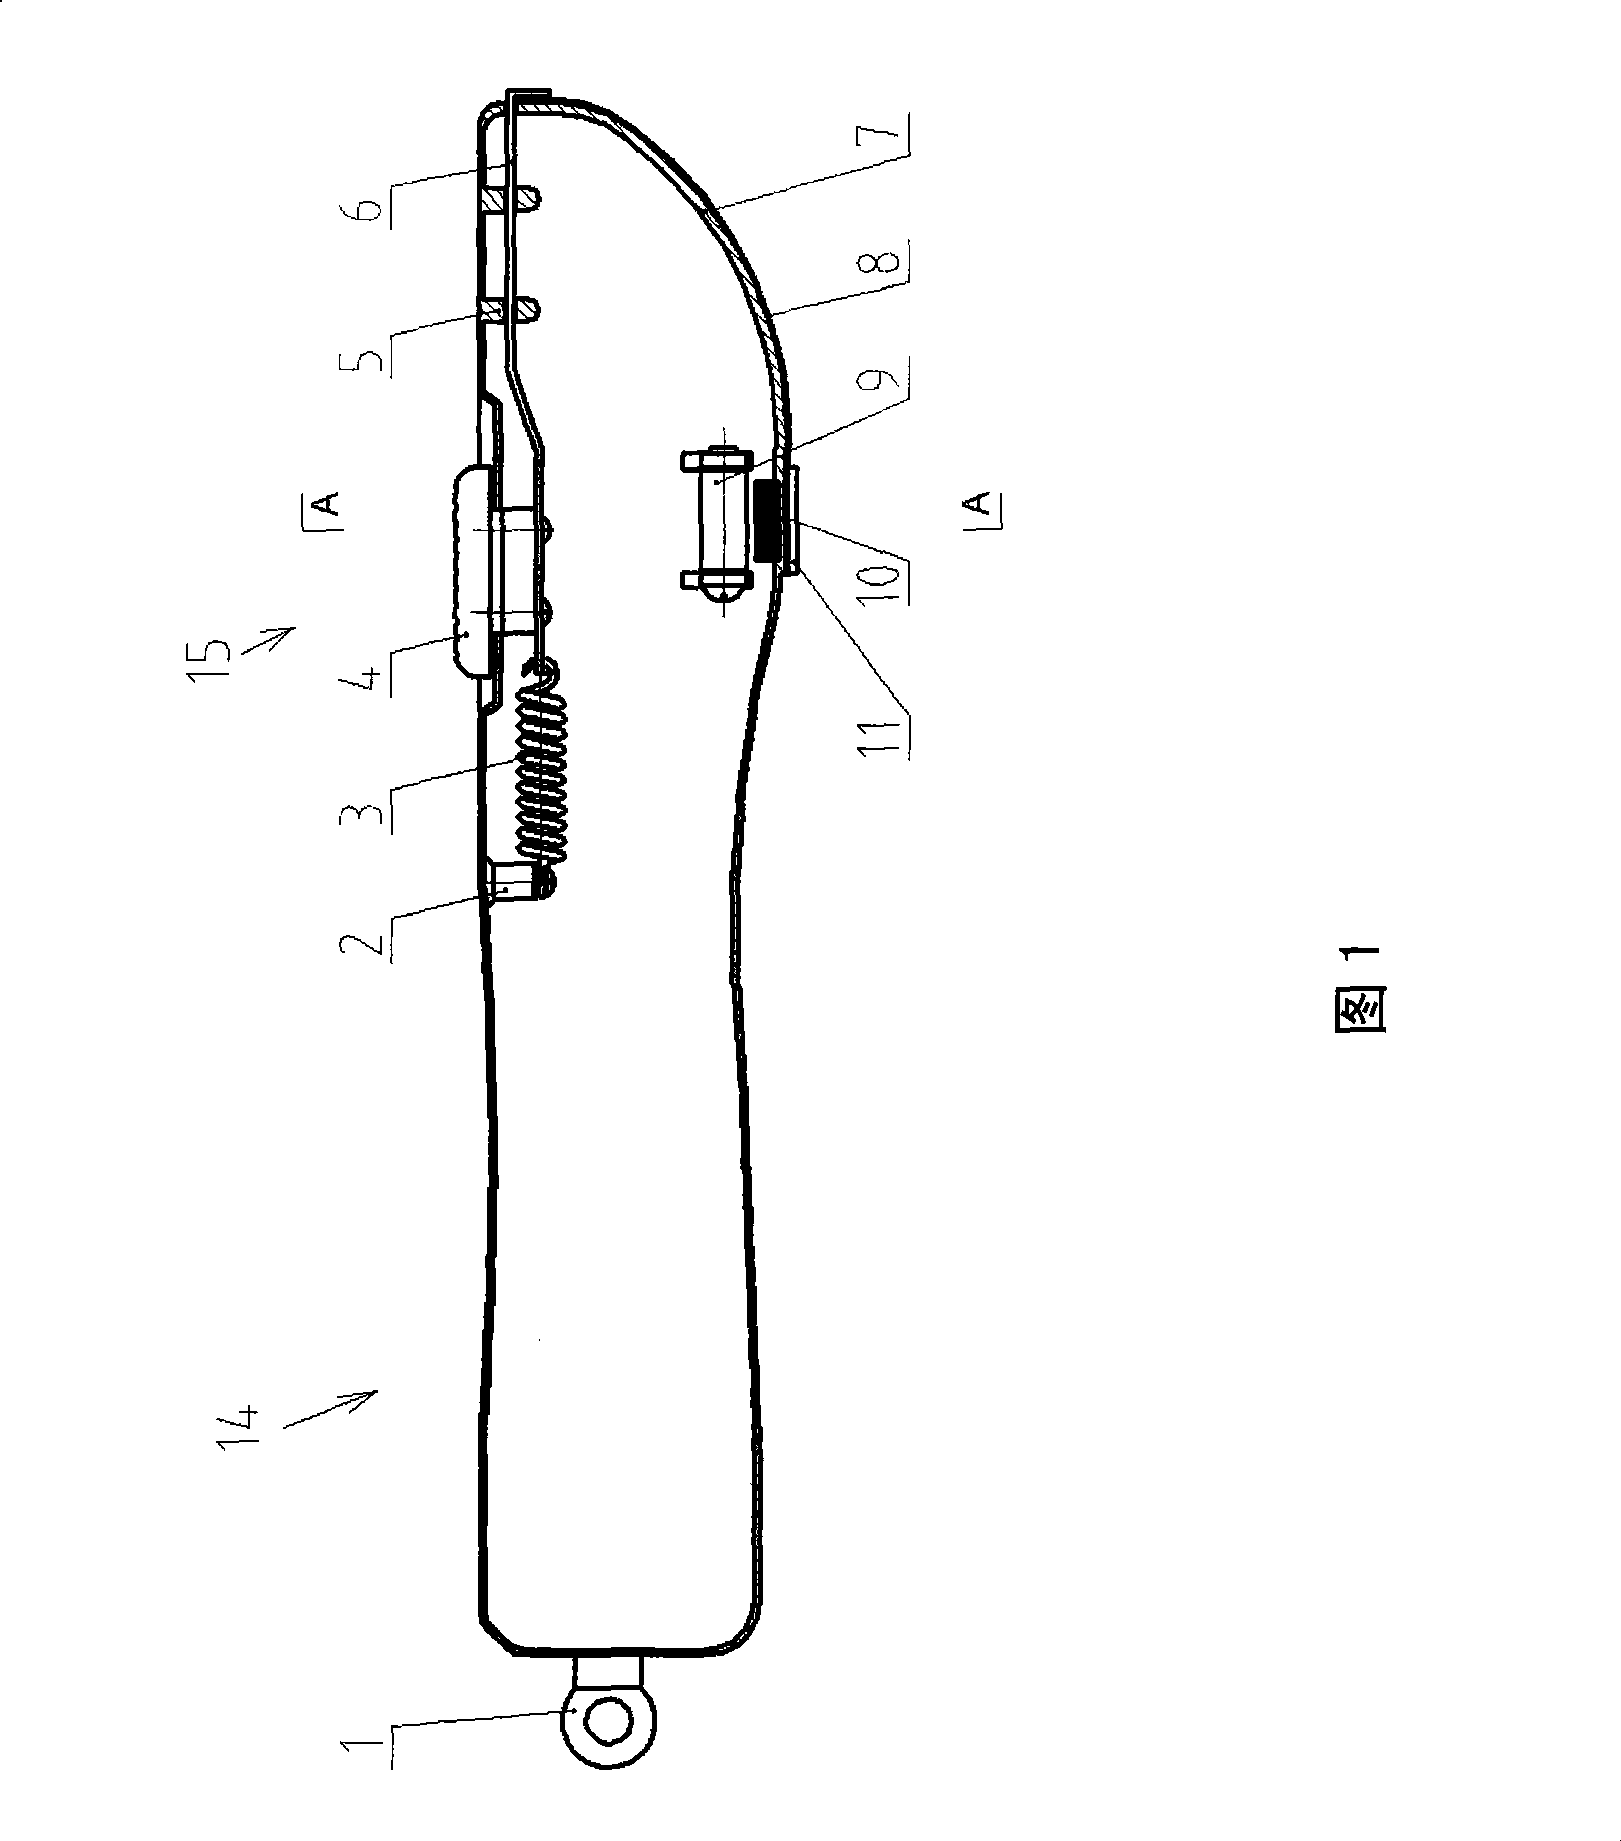 Hand-hold sampling apparatus and method for preventing sampling vector form deforming